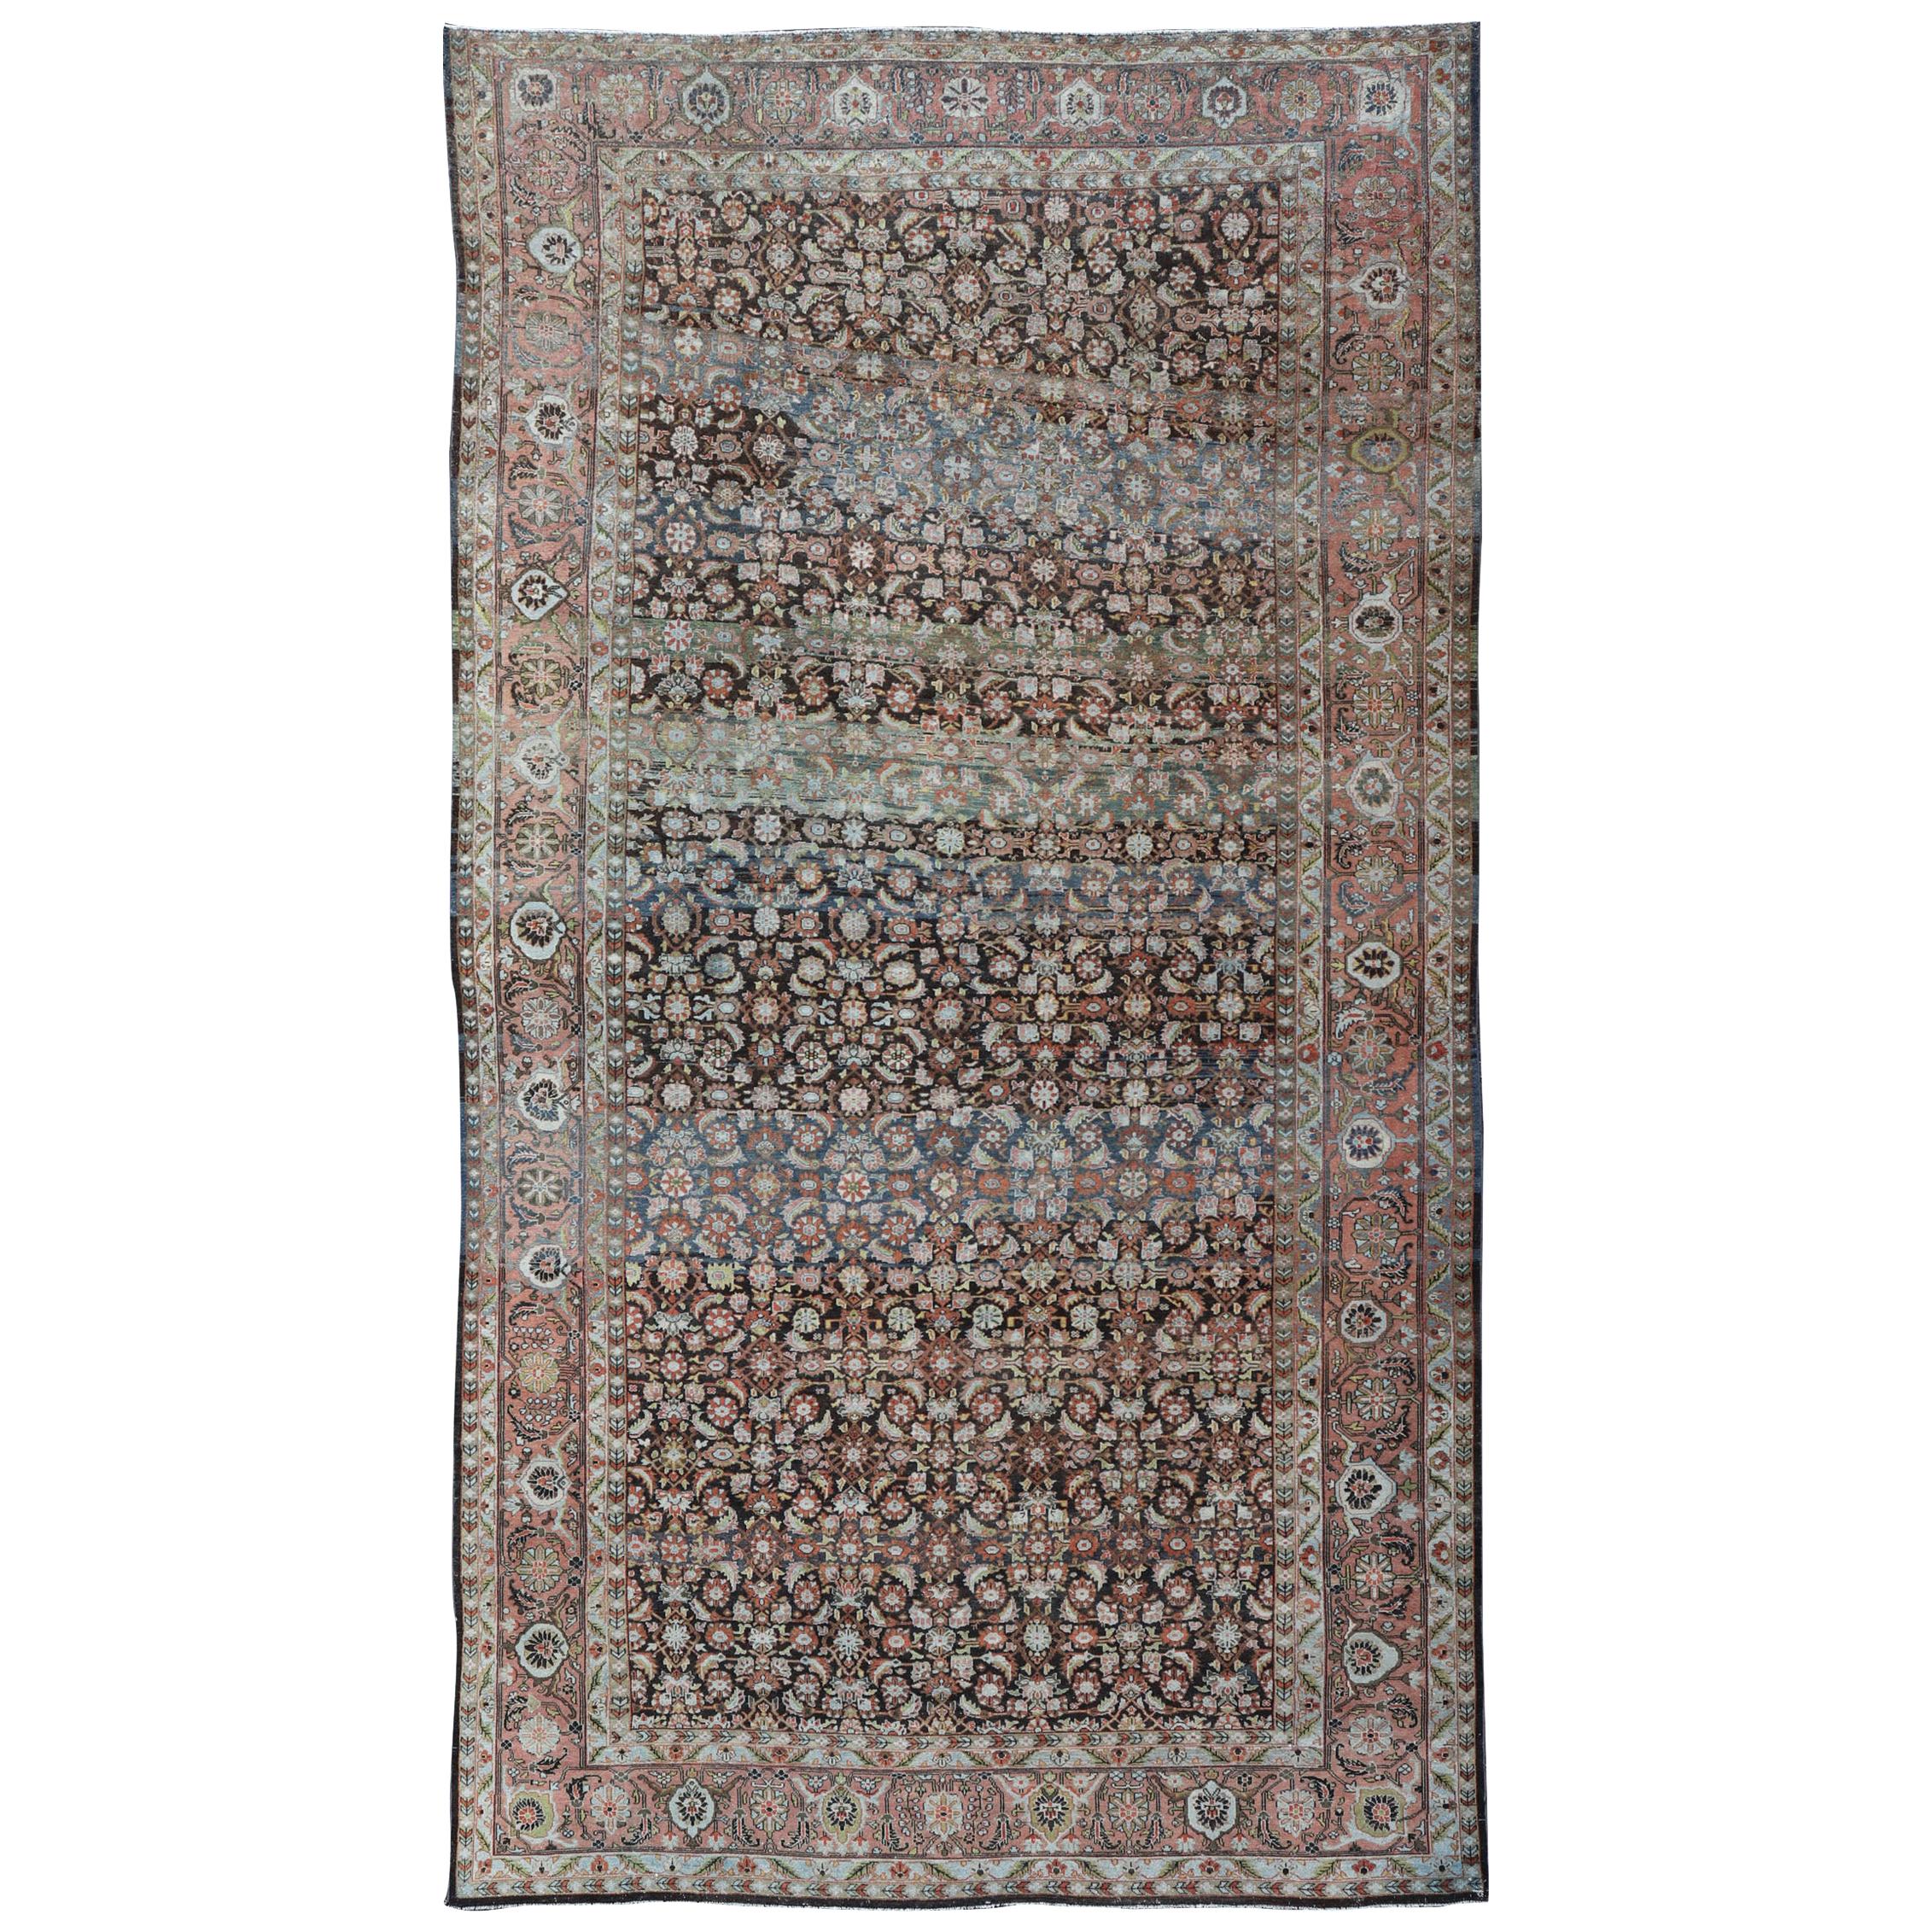 Antique Persian Malayer Rug in Variegated Charcoal, Brown, Green and Blue